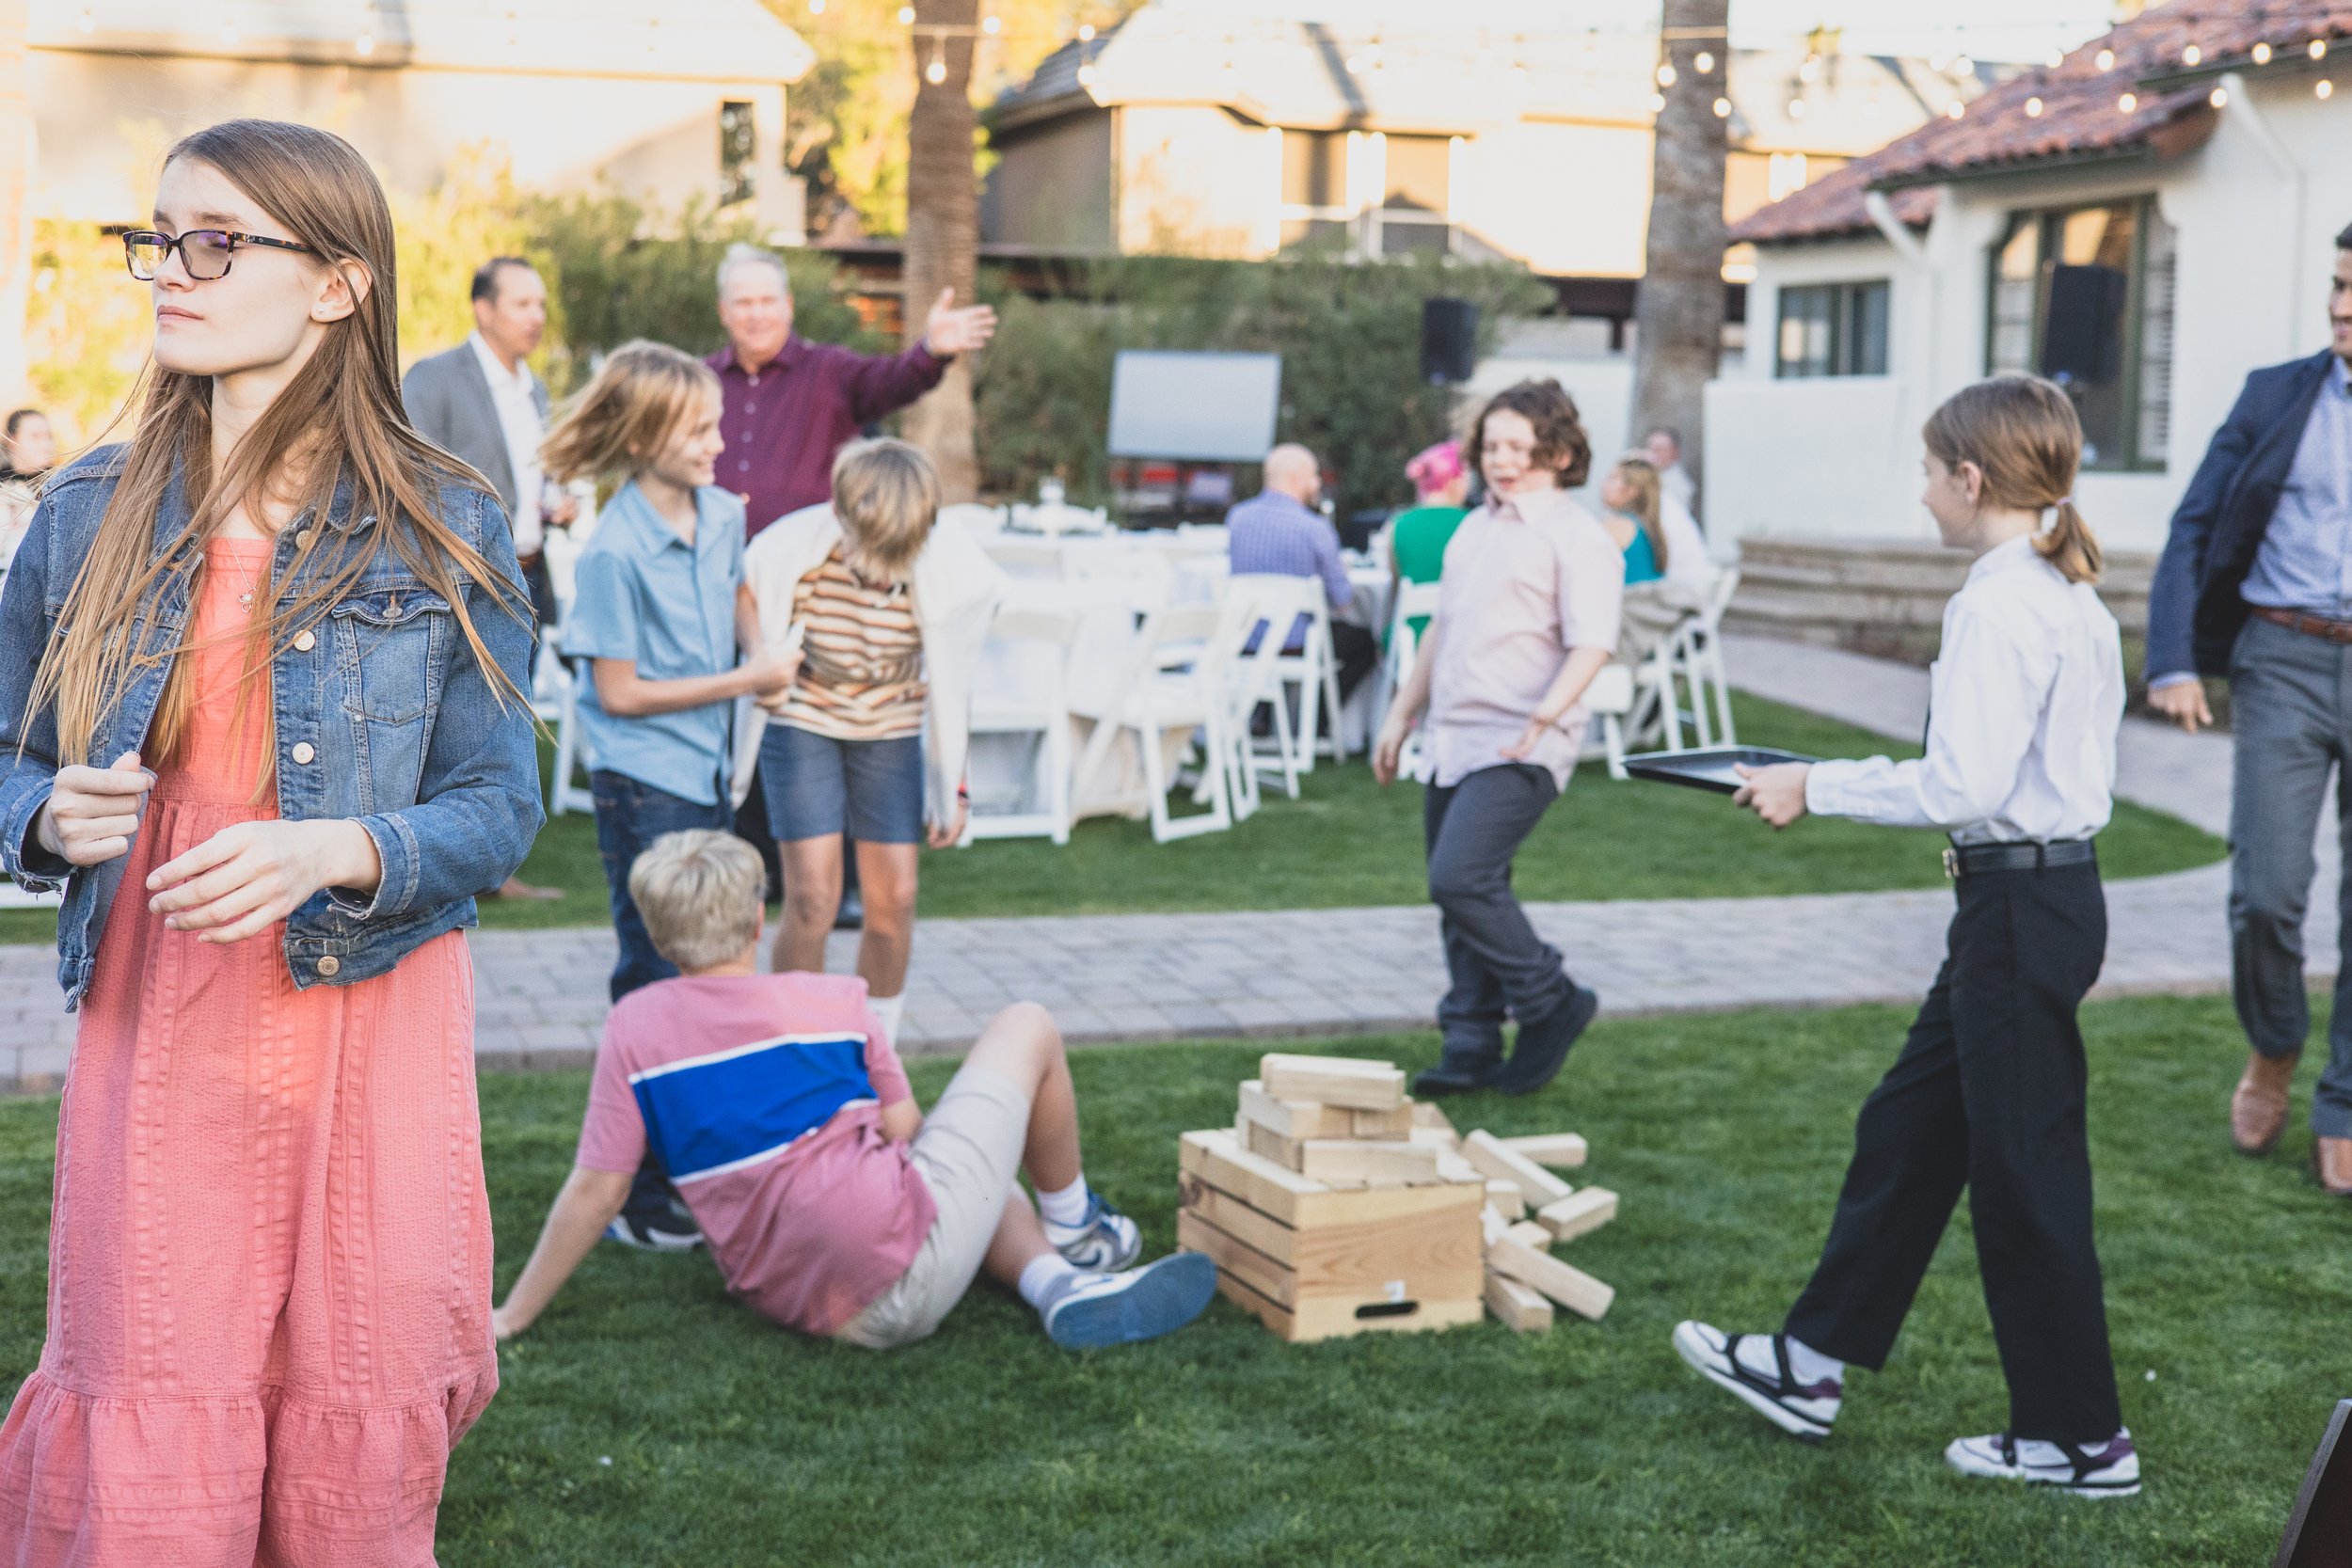 Guests having fun at a Private Corporate at sunset in the Coronado House a Historic Downtown Phoenix's newest venue, by Candid Corporate Event Photographer; Jennifer Lind Schutsky.